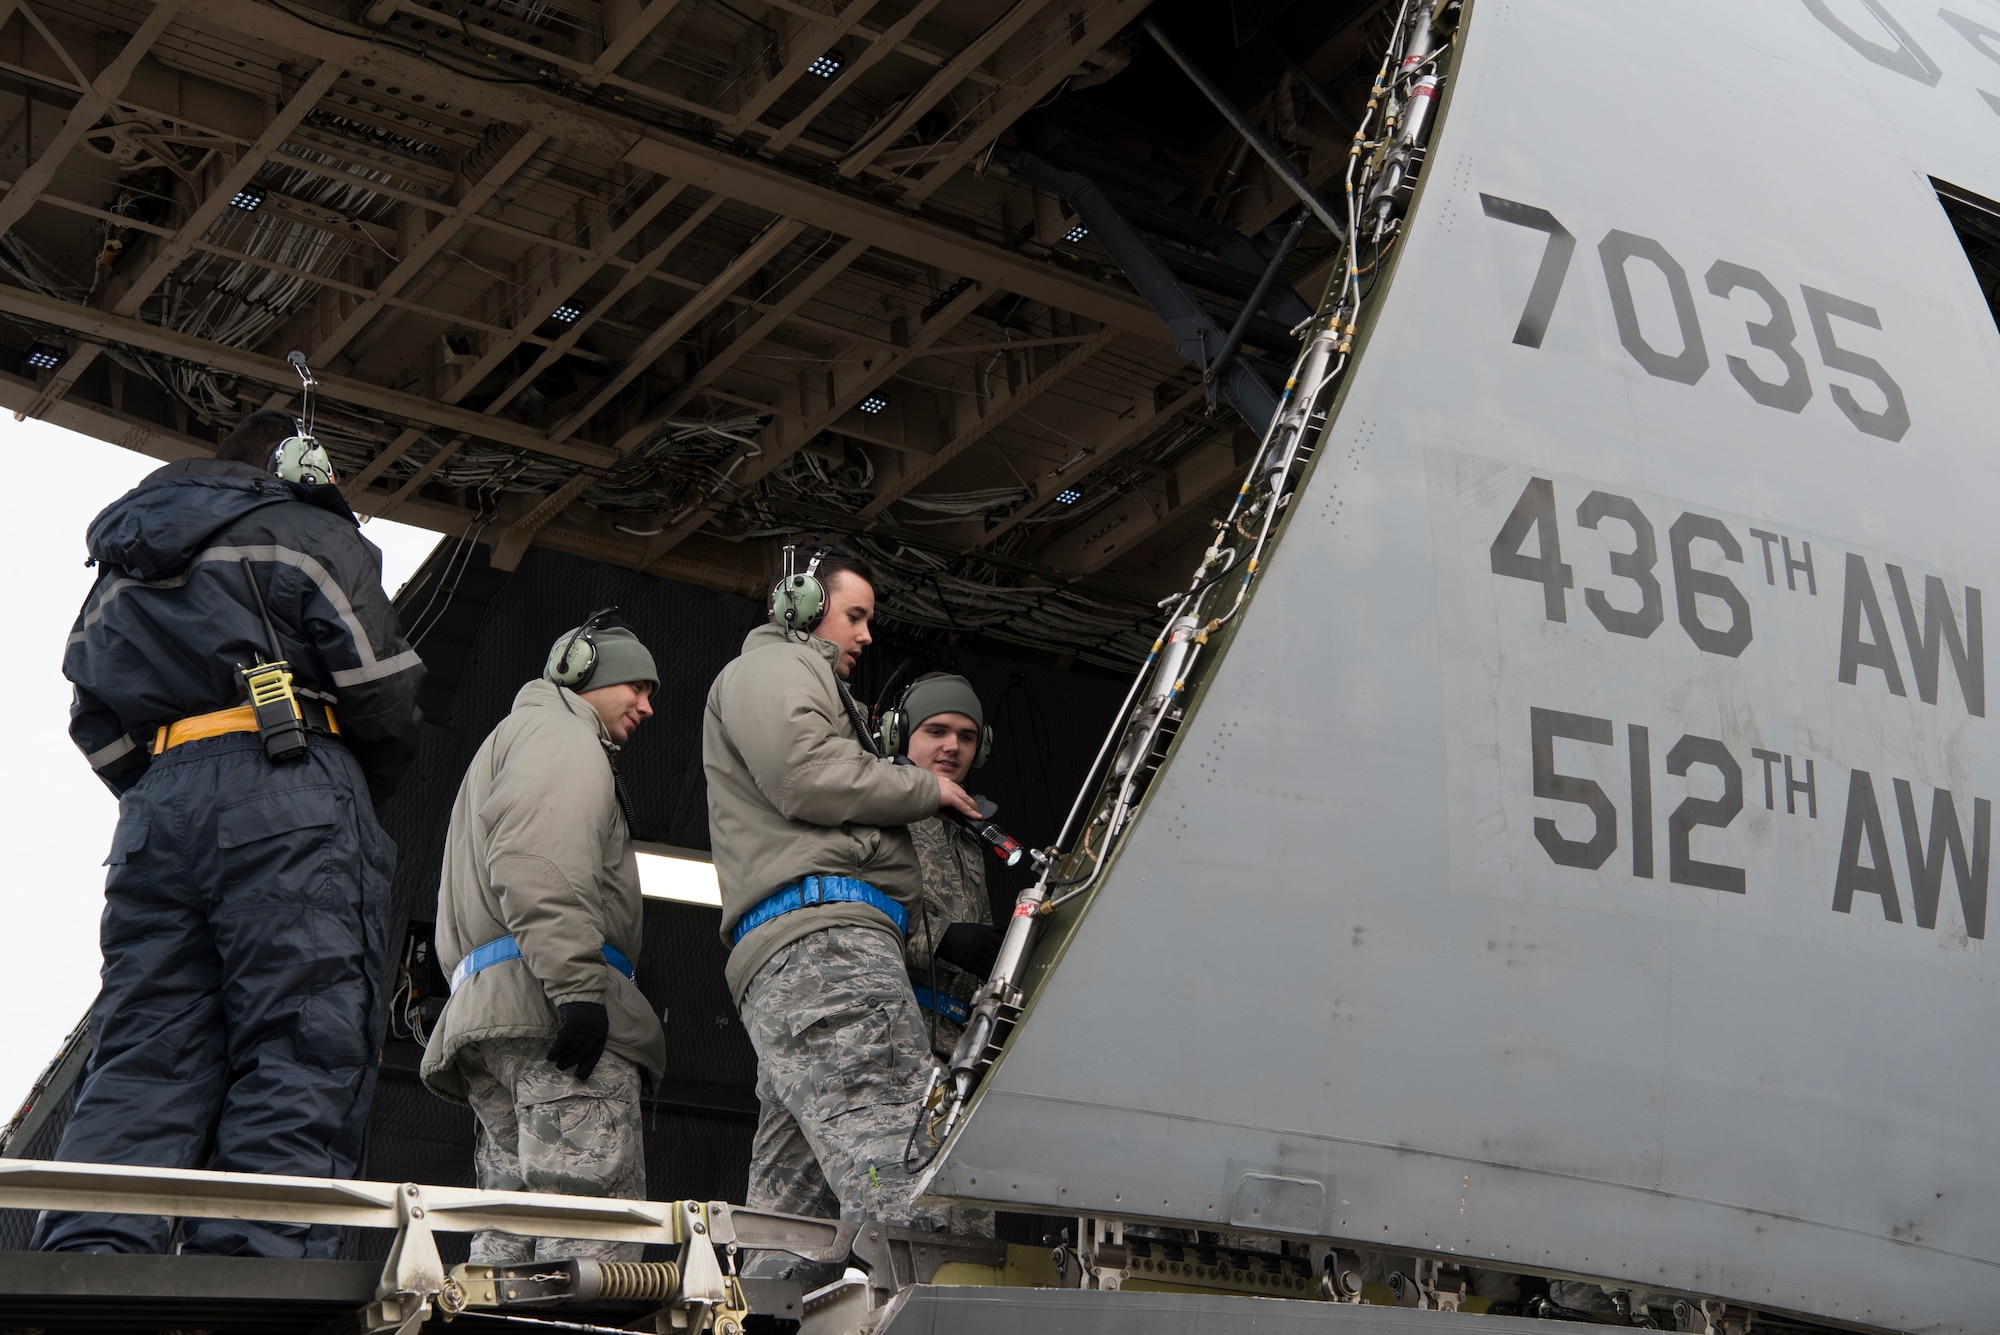 Staff Sgt. Ryan Johnson (front right), 521st Air Mobility Operations Wing regional training center crew chief instructor, shows students what they need to inspect aboard a C-5M Super Galaxy aircraft at Ramstein Air Base, Germany, Nov. 29, 2018. The 521st AMOW’s mission, to “expedite global reach to professionally answer our Nation’s call,” relies heavily on skilled aircraft maintainers who ensure transient aircraft get the maintenance they need en route. (U.S. Air Force photo by Staff Sgt. Aaron J. Jenne)